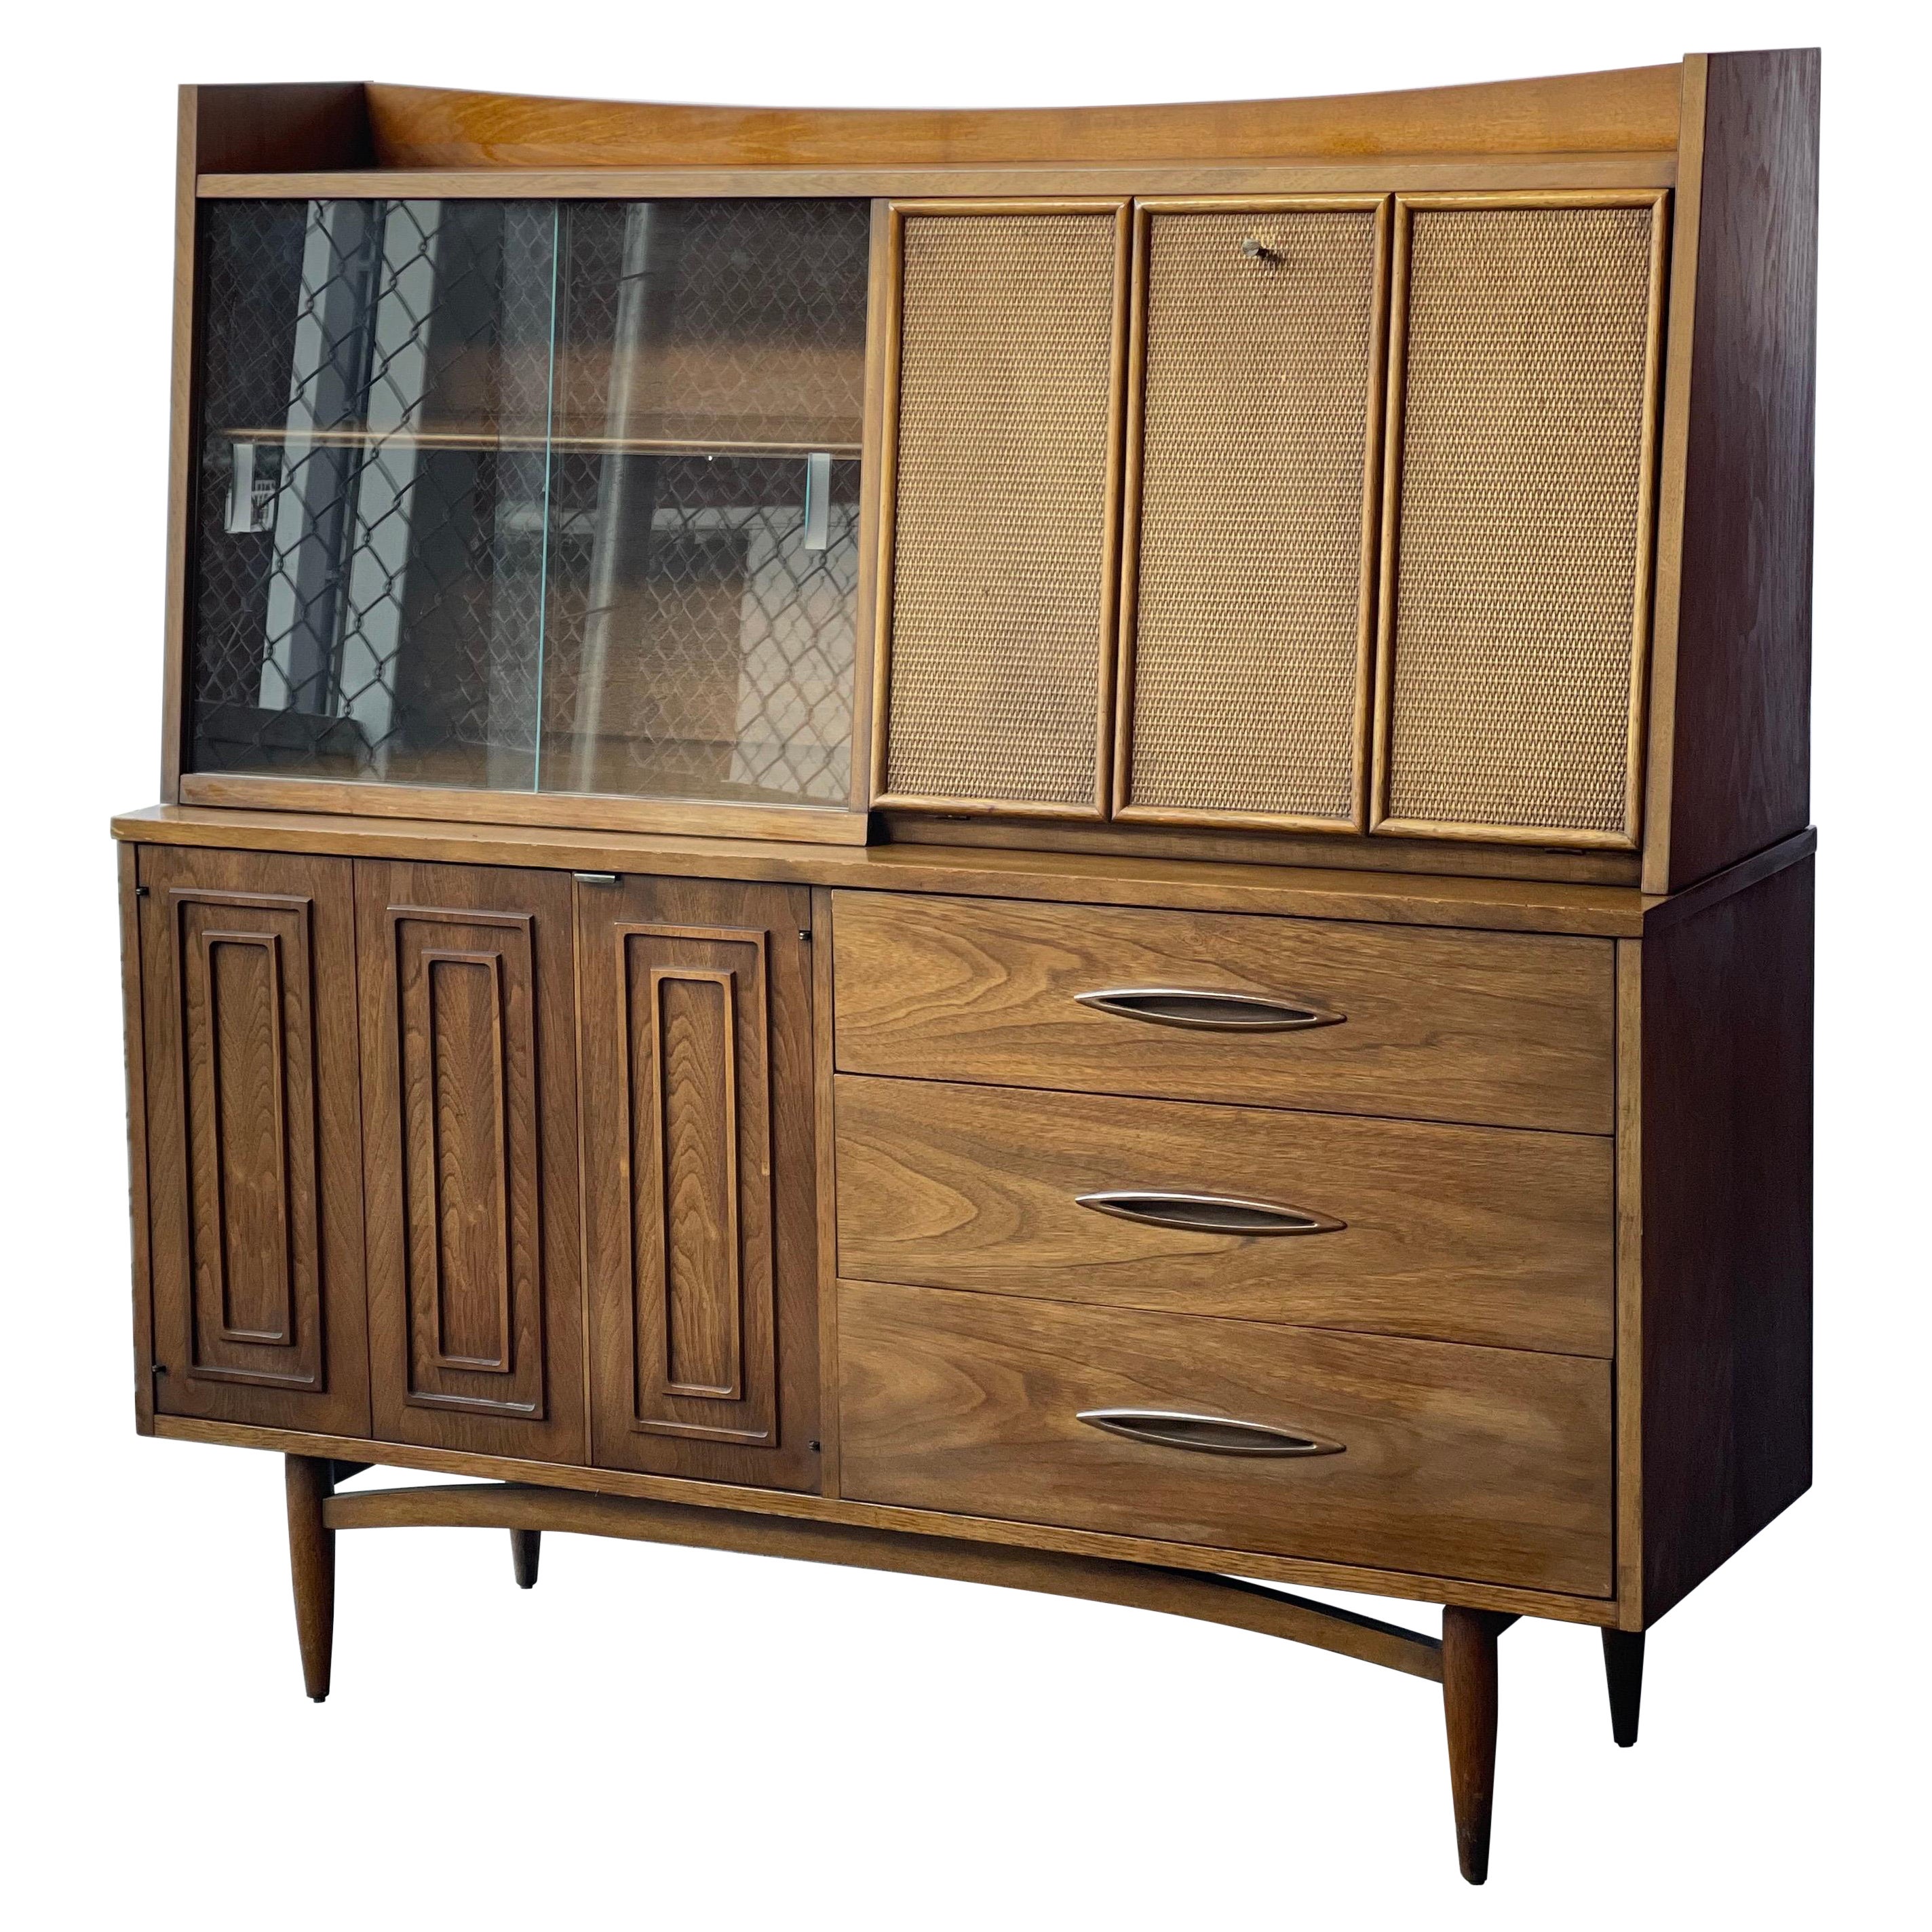 Buffet Credenza Sideboard Mid Century Modern Wood Cabinet Retro Side Accent Unit 